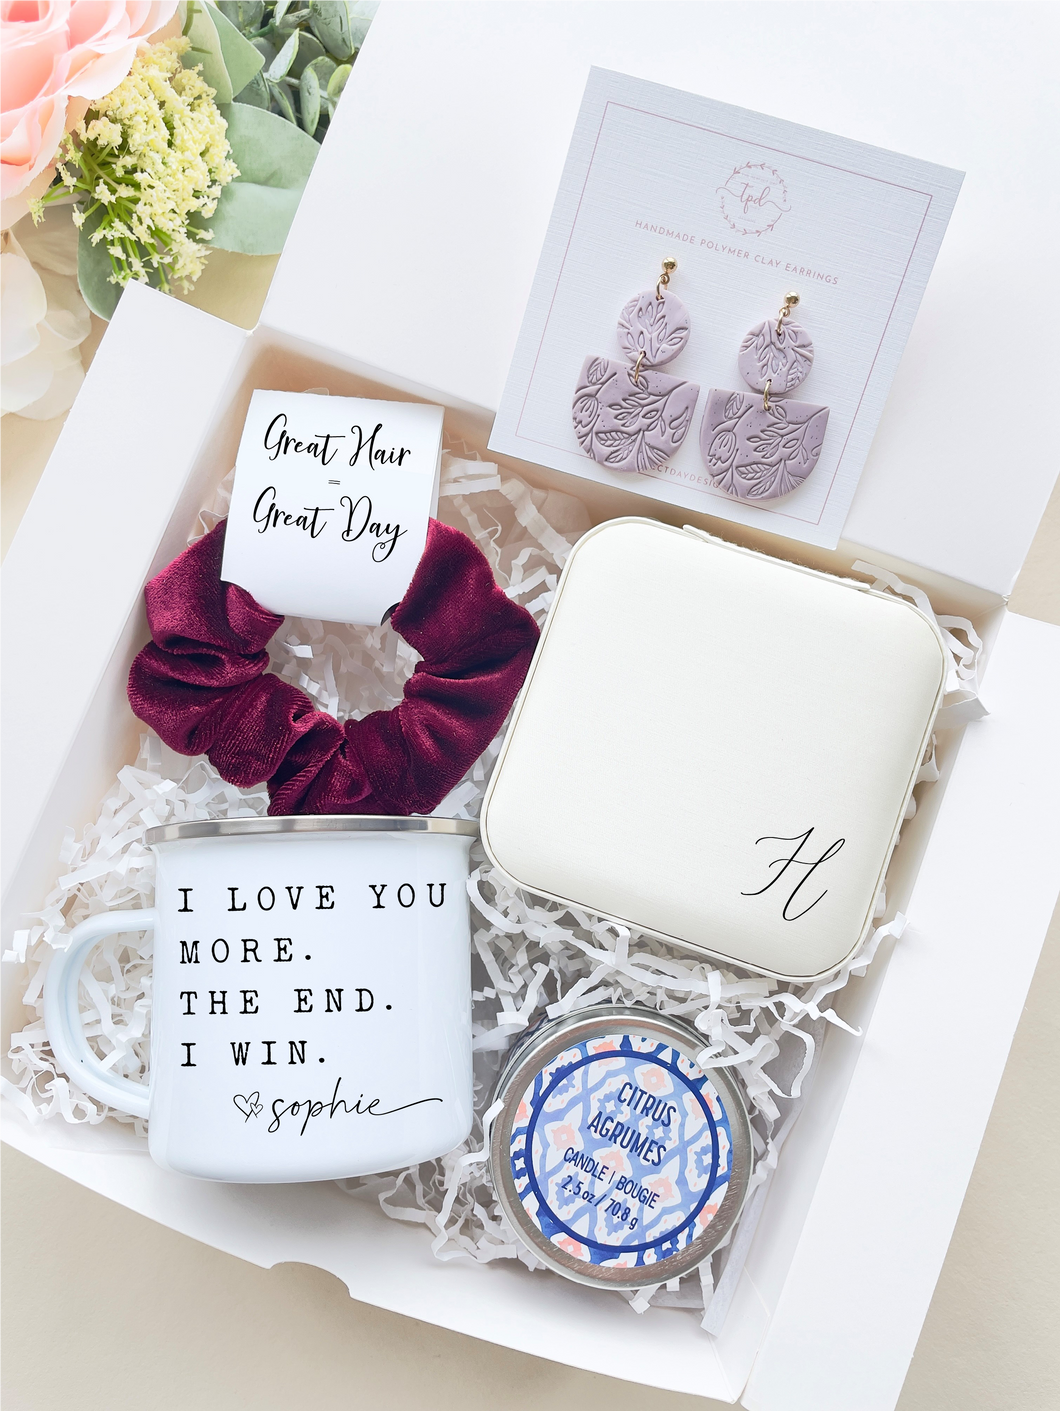 Mother's Day Gifts, Mother's Day Gift Set, Mother's Day Gift Basket, Mother's Day Gift Box, Personalized Gifts, Unique Gifts for Mom, Mom Gifts, Custom Gifts, New Mom Gifts, Self Care Gifts, Personalized Care Package